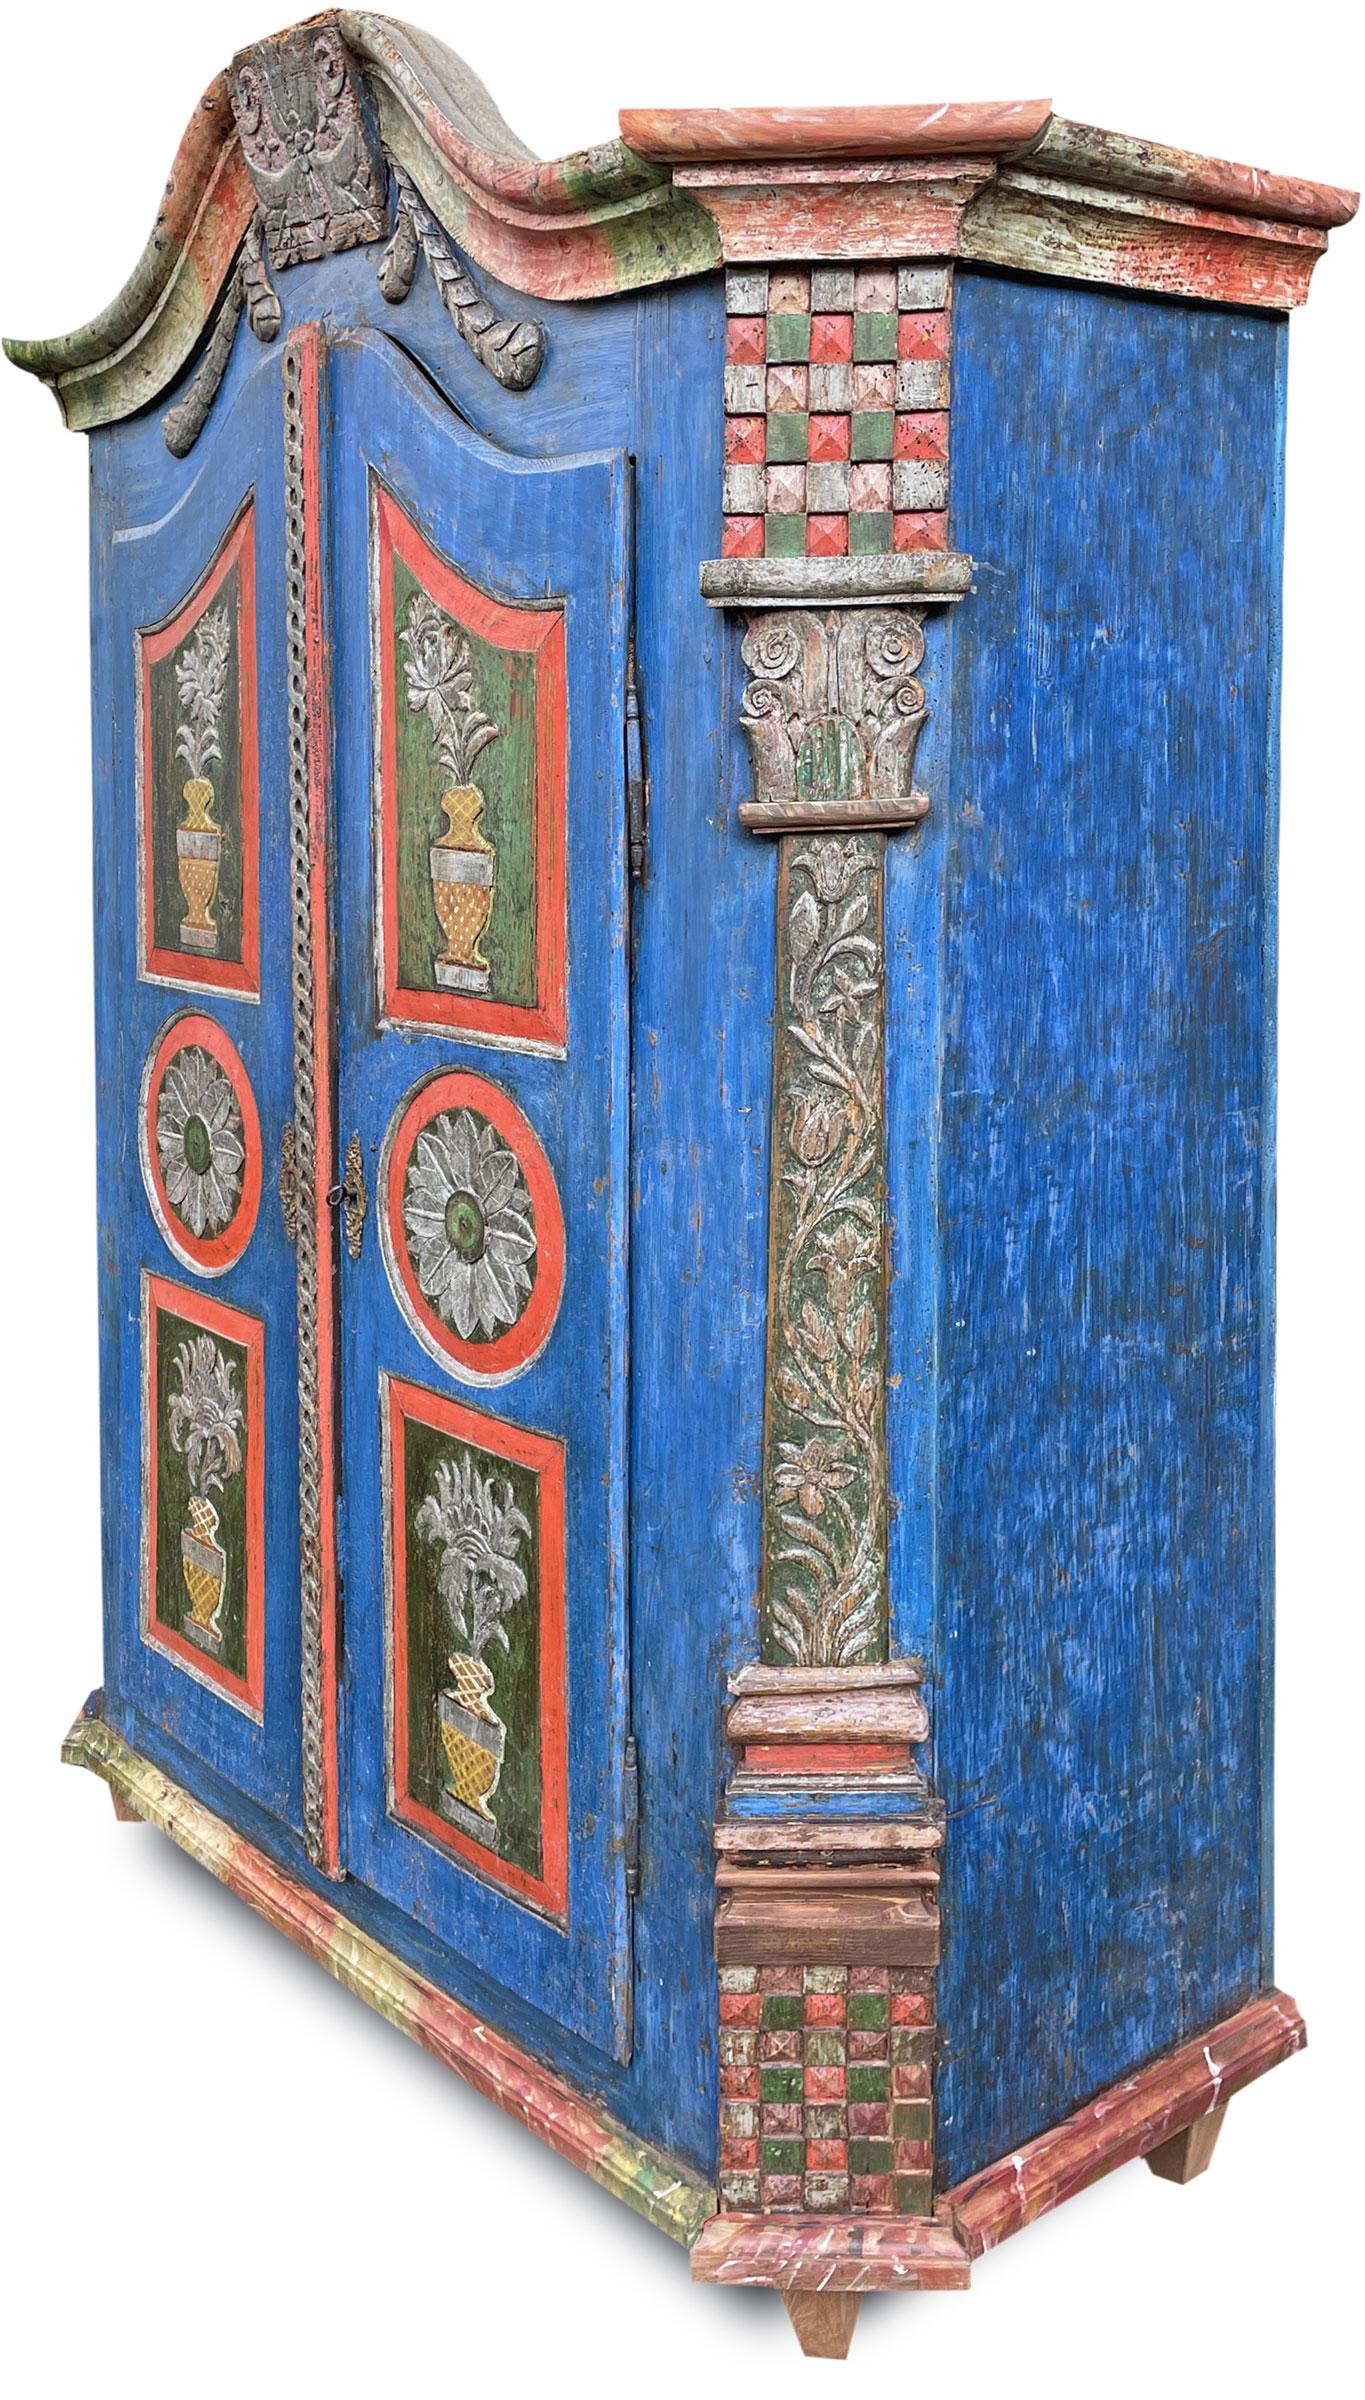 Blue painted wardrobe with rich carvings

Measures: 
H. 190 cm – W. 130 cm (147 cm to the frames) – D. 49 cm (56 cm to the frames)
H. 74,8 in – W. 51,1 in (57,8 in to the frames) – D. 19,2 in (22 in to the frames)

Central Europe painted wardrobe